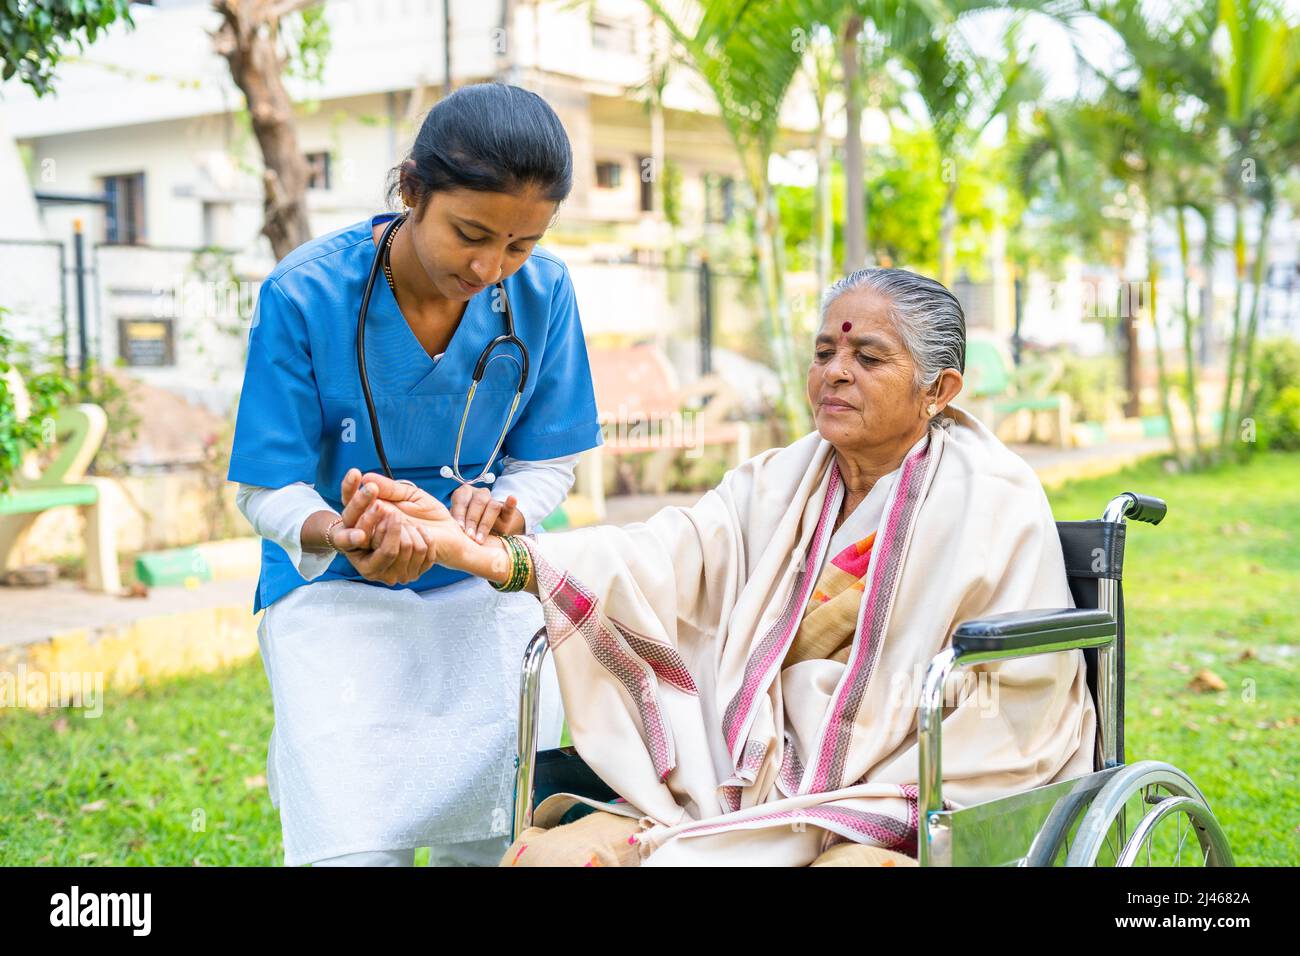 Doctor checking pulse rate of disabled woman while on wheelchair at park - concept of medical care, caretaker and professional occupation Stock Photo